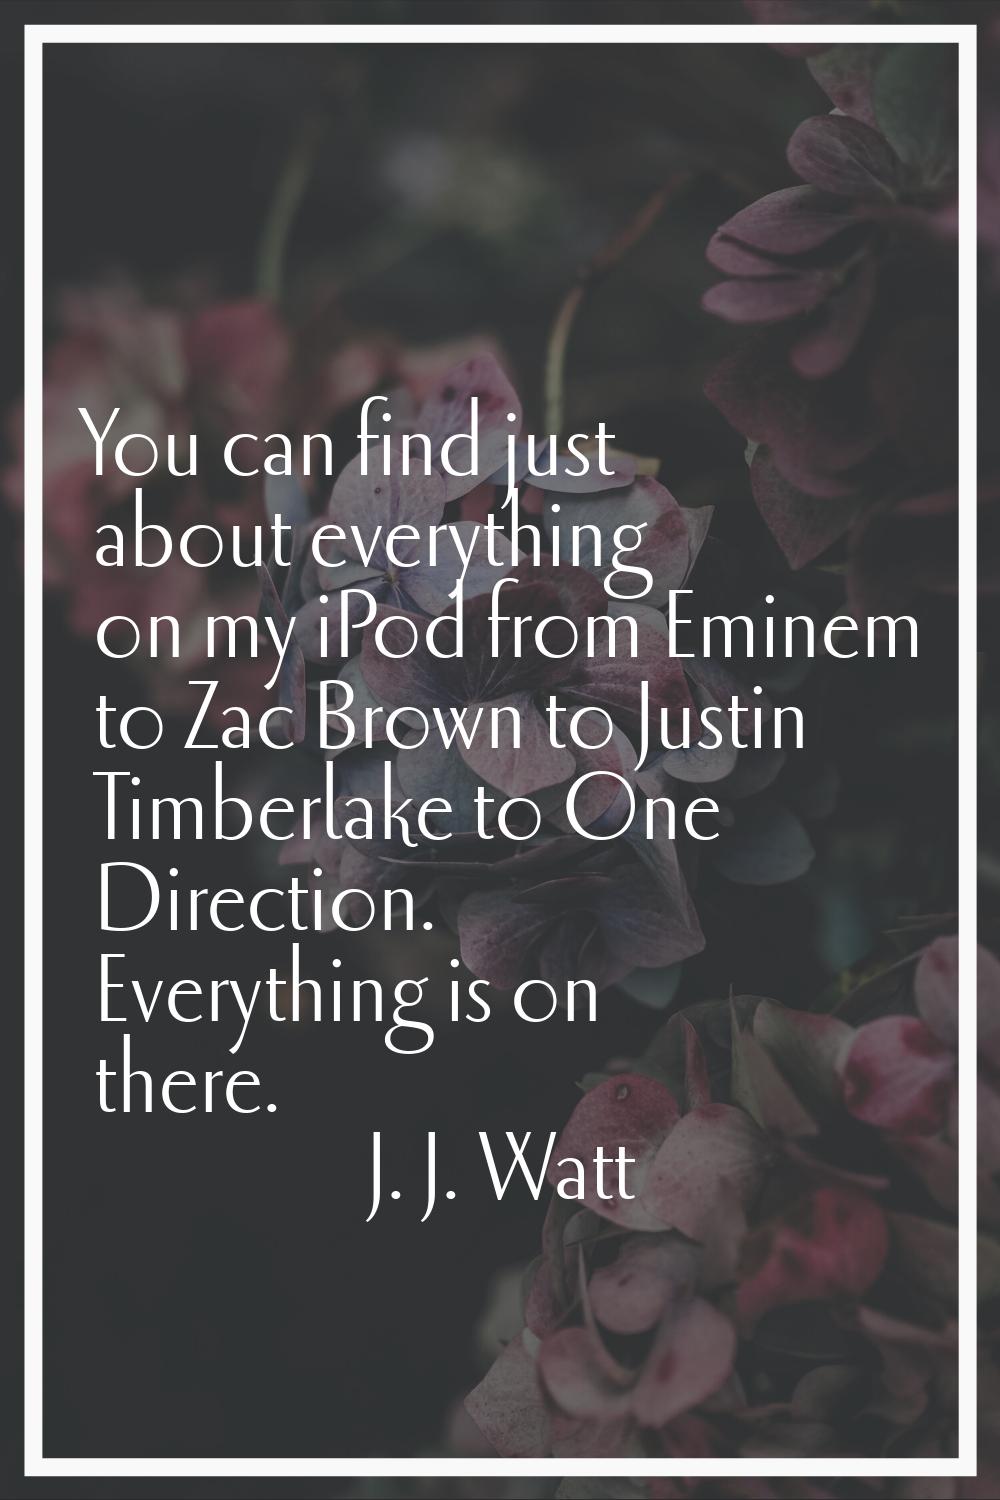 You can find just about everything on my iPod from Eminem to Zac Brown to Justin Timberlake to One 